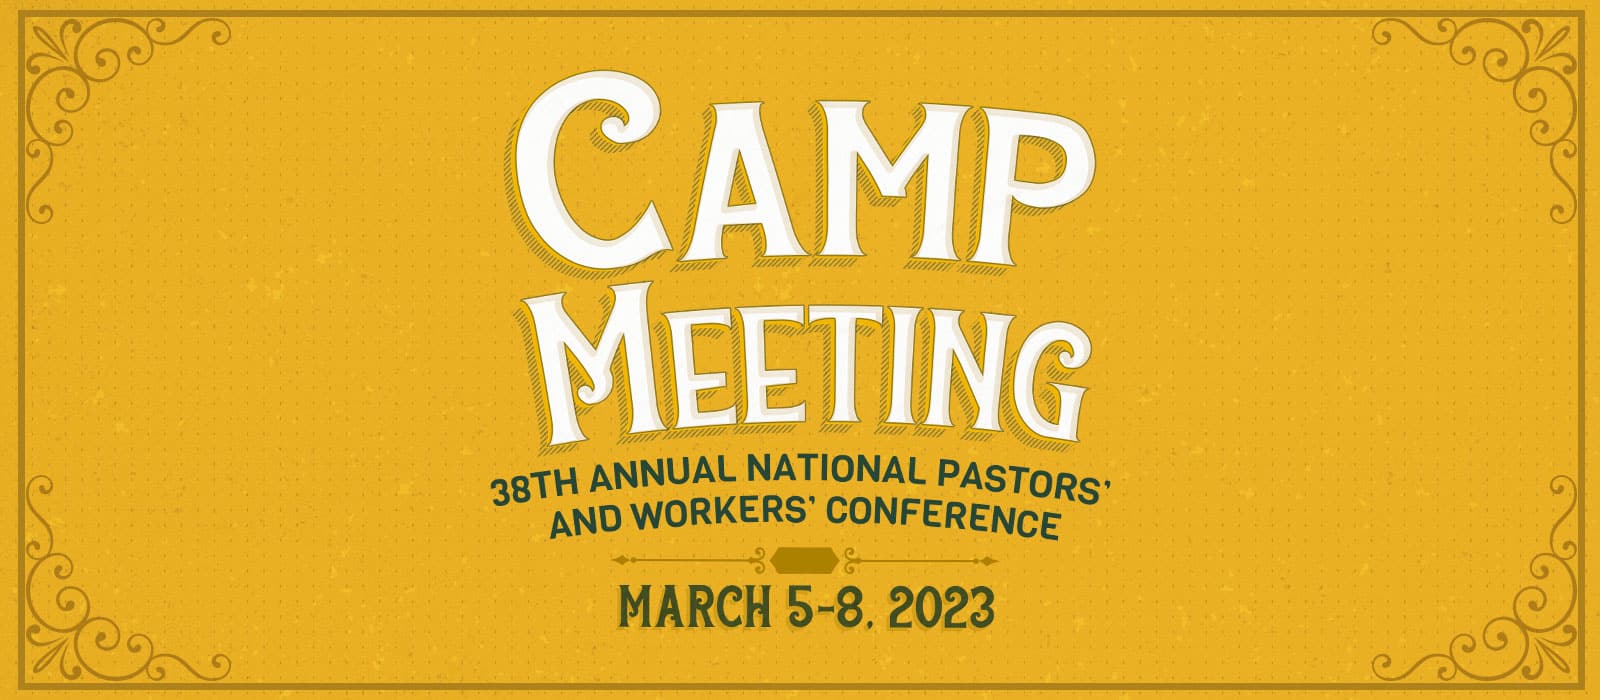 38th Annual National Pastors' & Workers' Conference